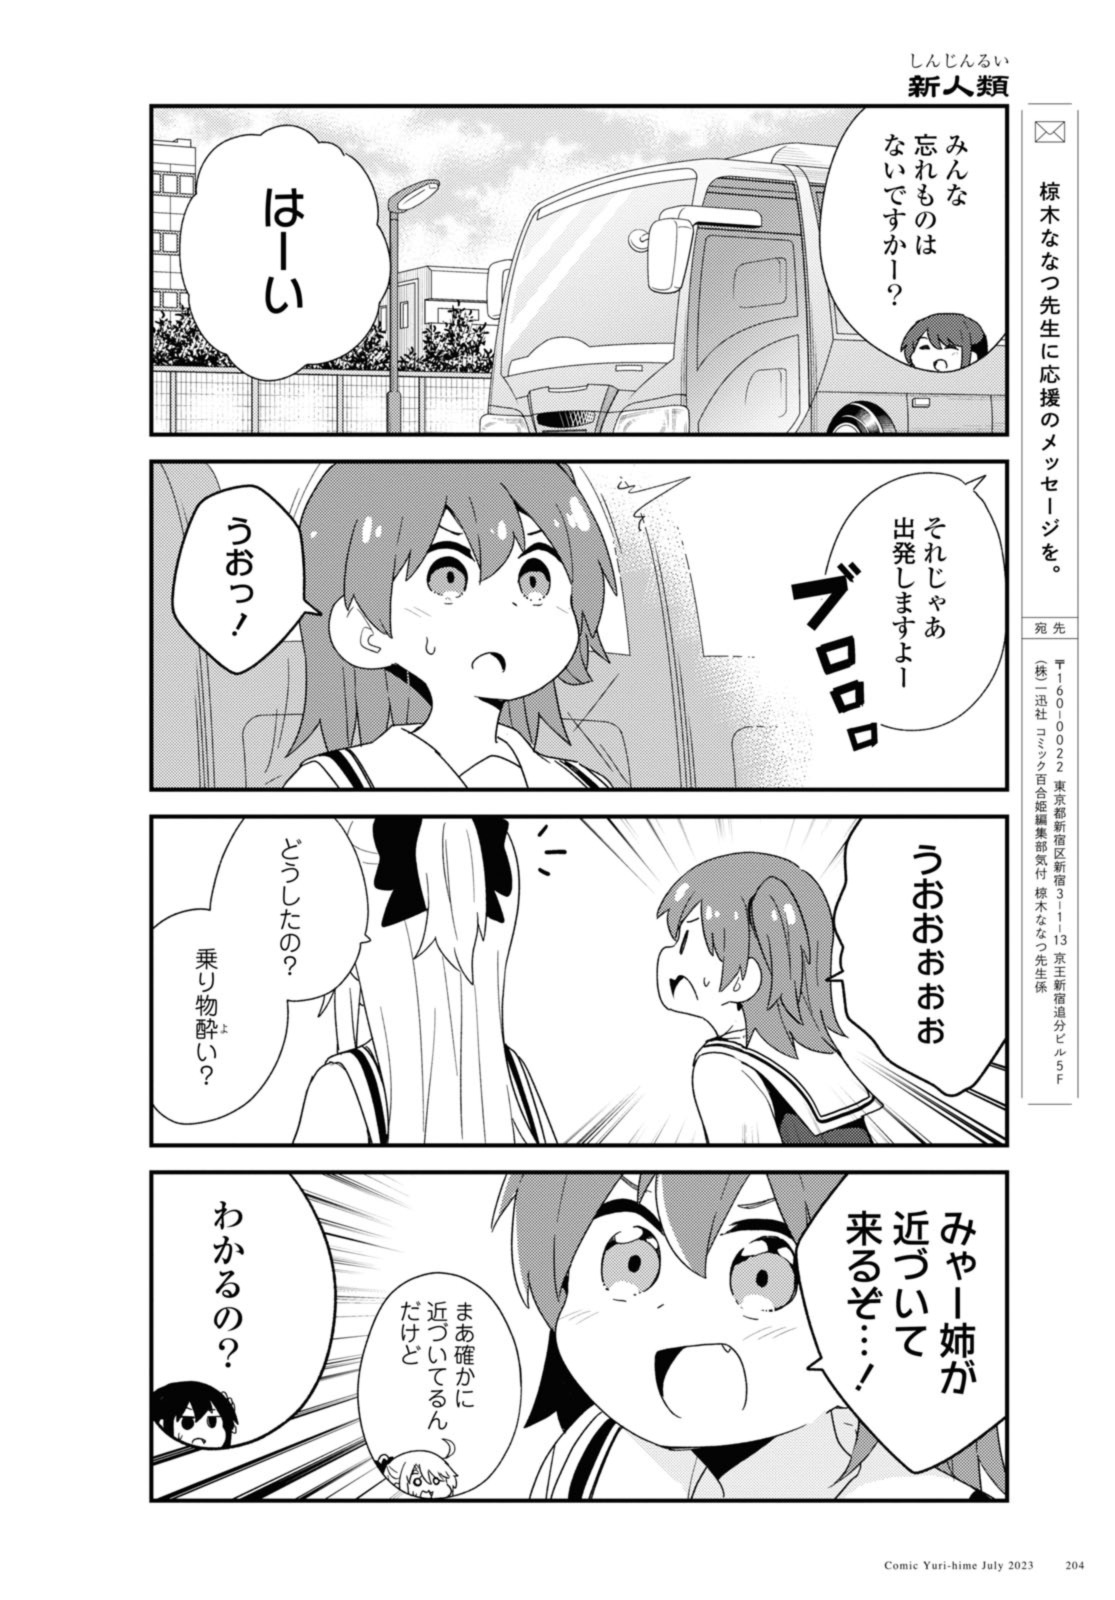 Wataten! An Angel Flew Down to Me 私に天使が舞い降りた！ 第107話 - Page 12